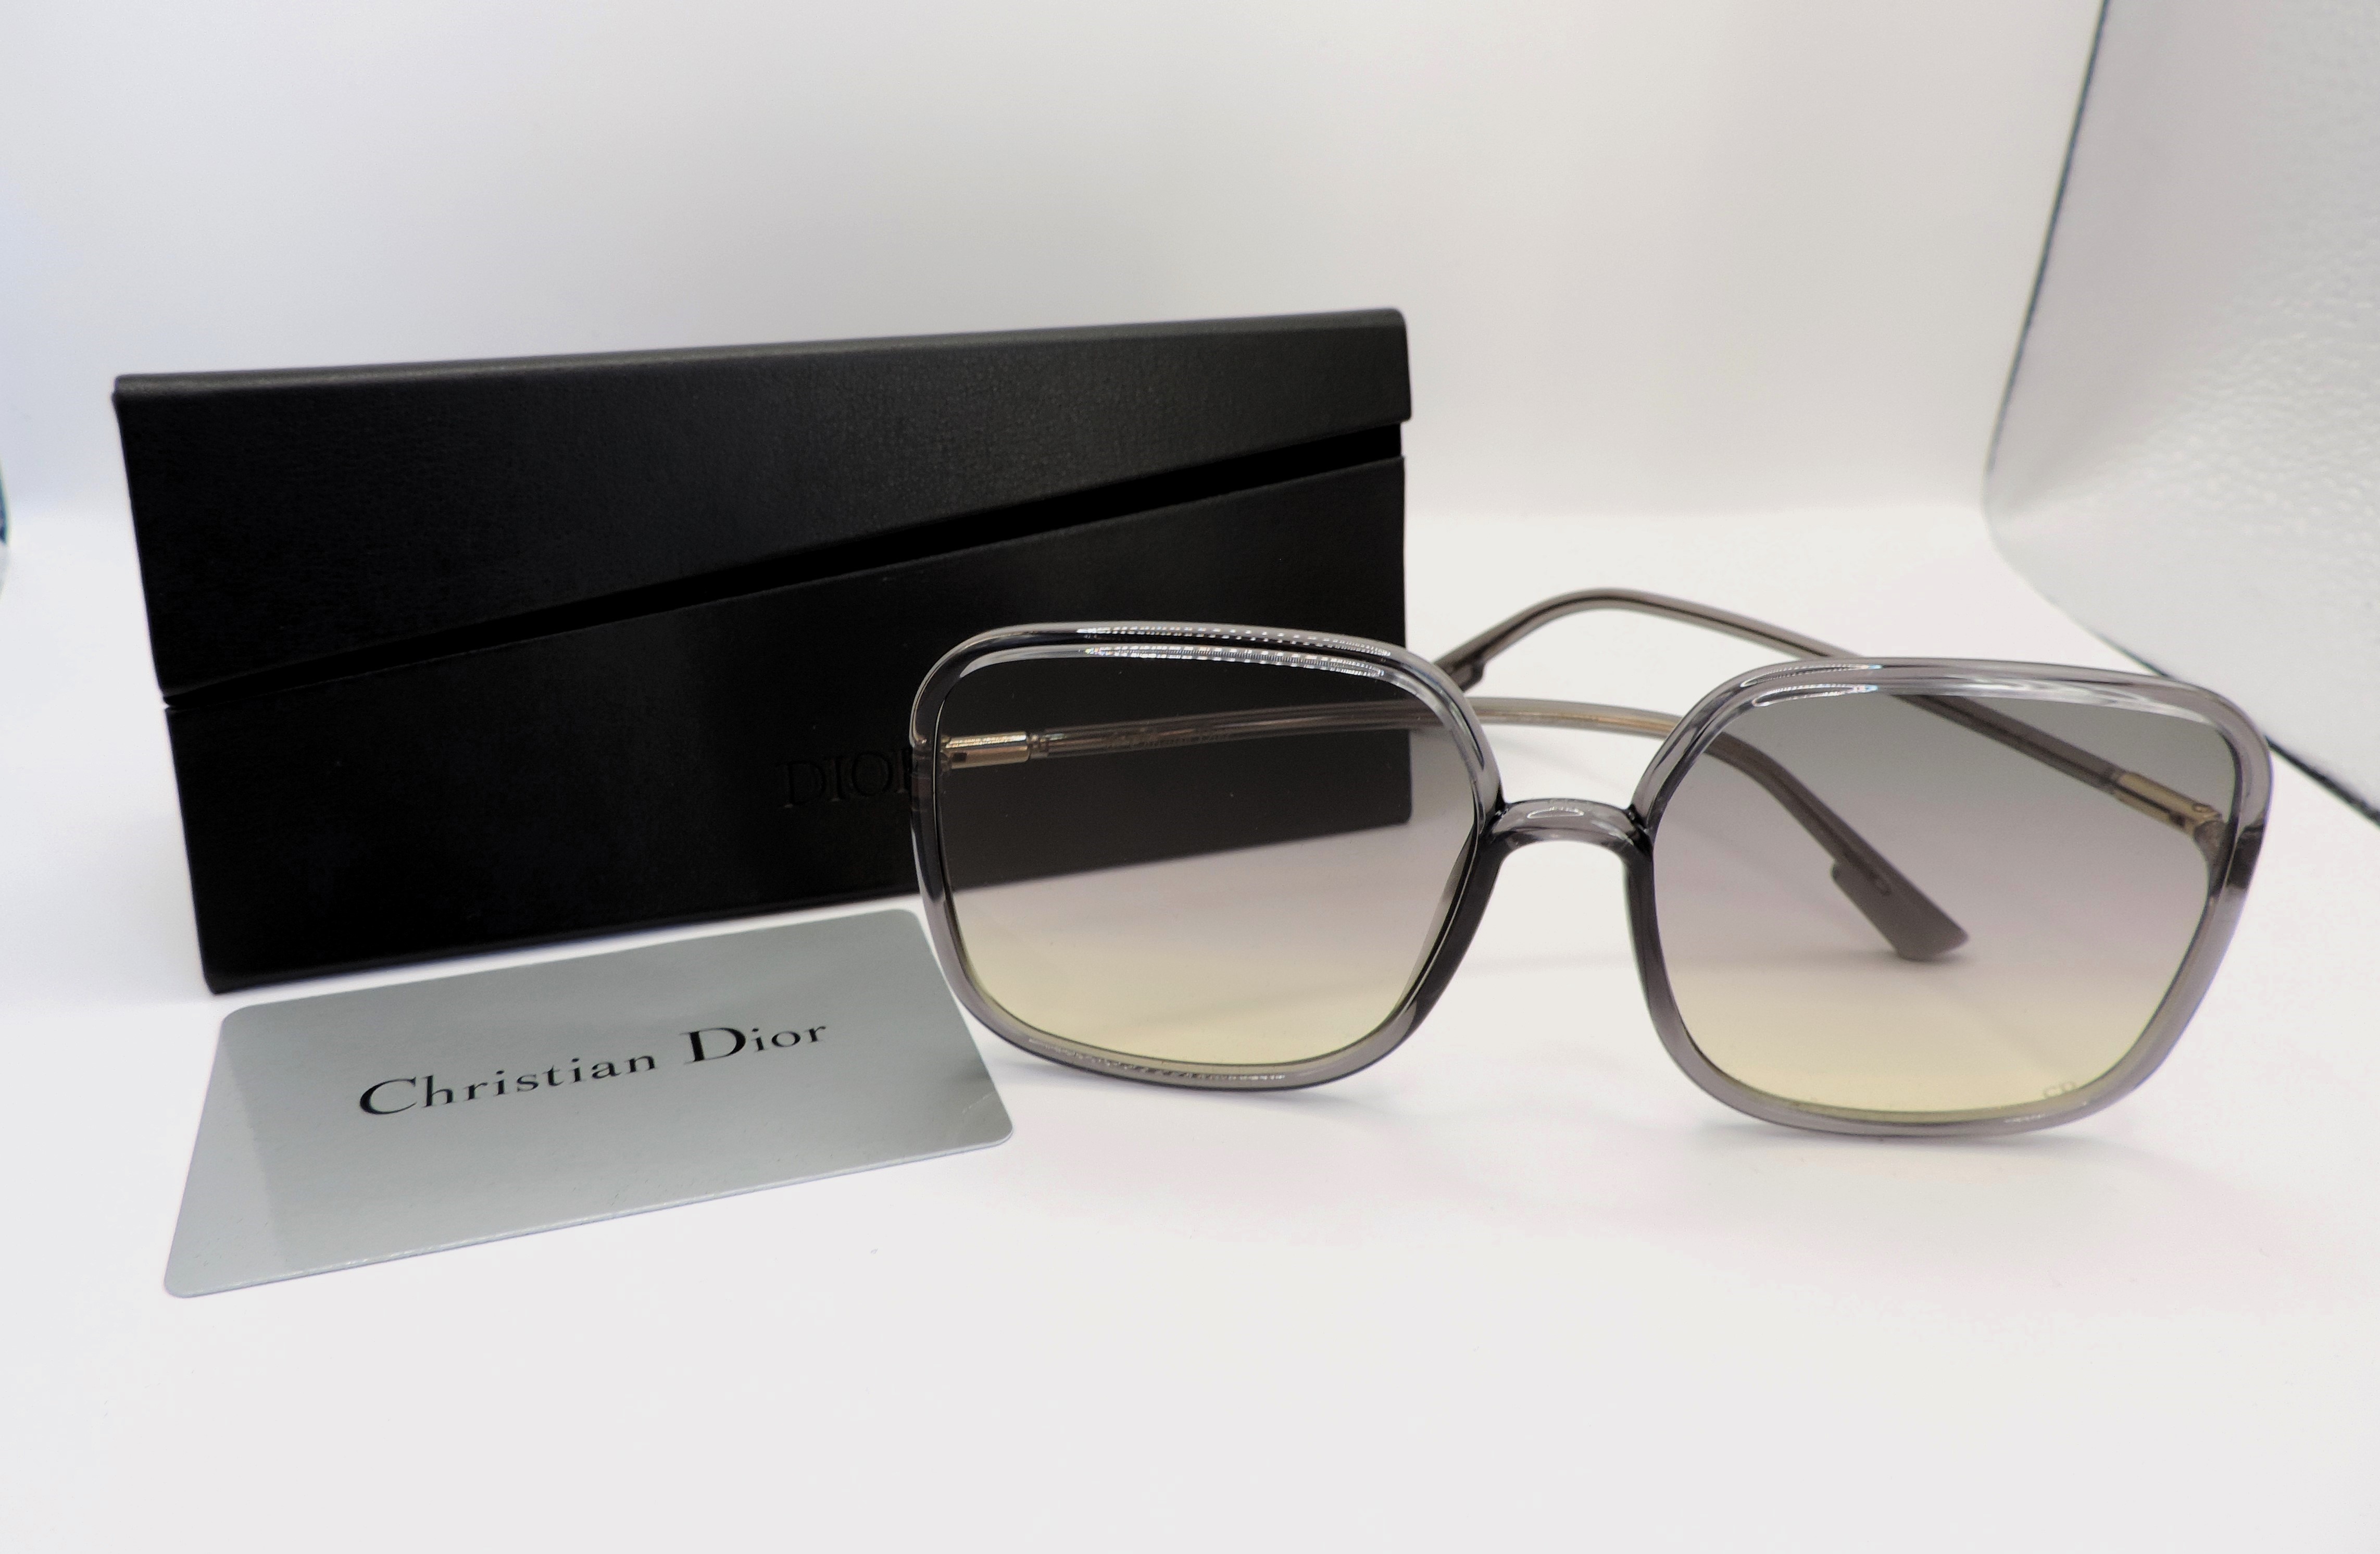 Christian Dior SoStellaire 1 Sunglasses New With Case - Image 5 of 11